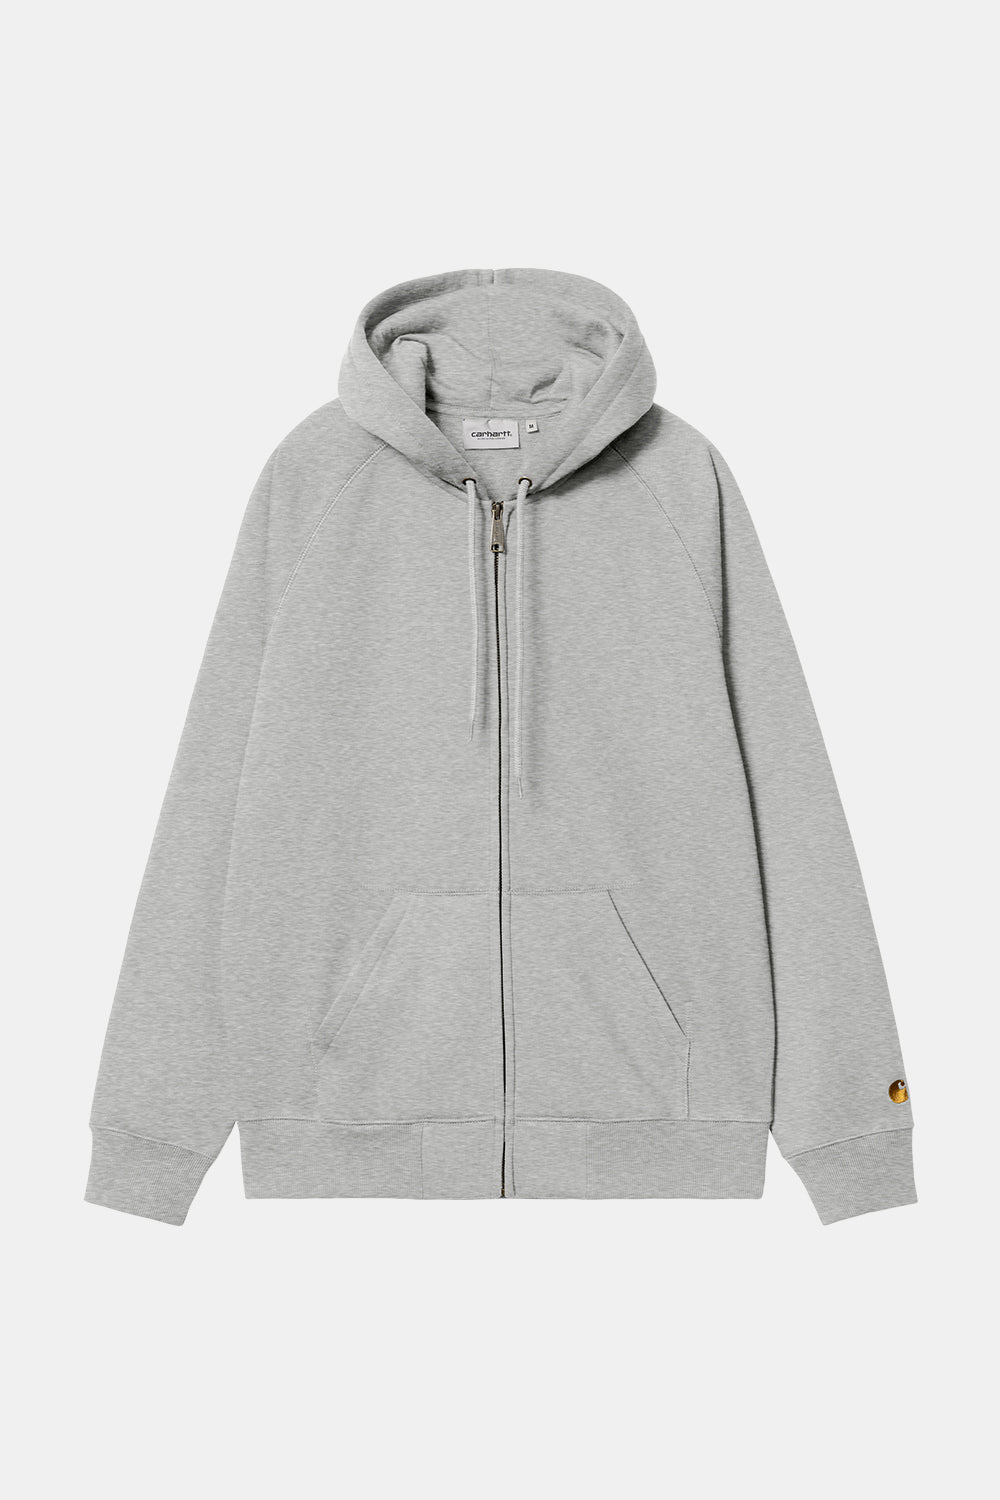 Carhartt WIP Hooded Chase Jacket (Grey Heather/Gold)
